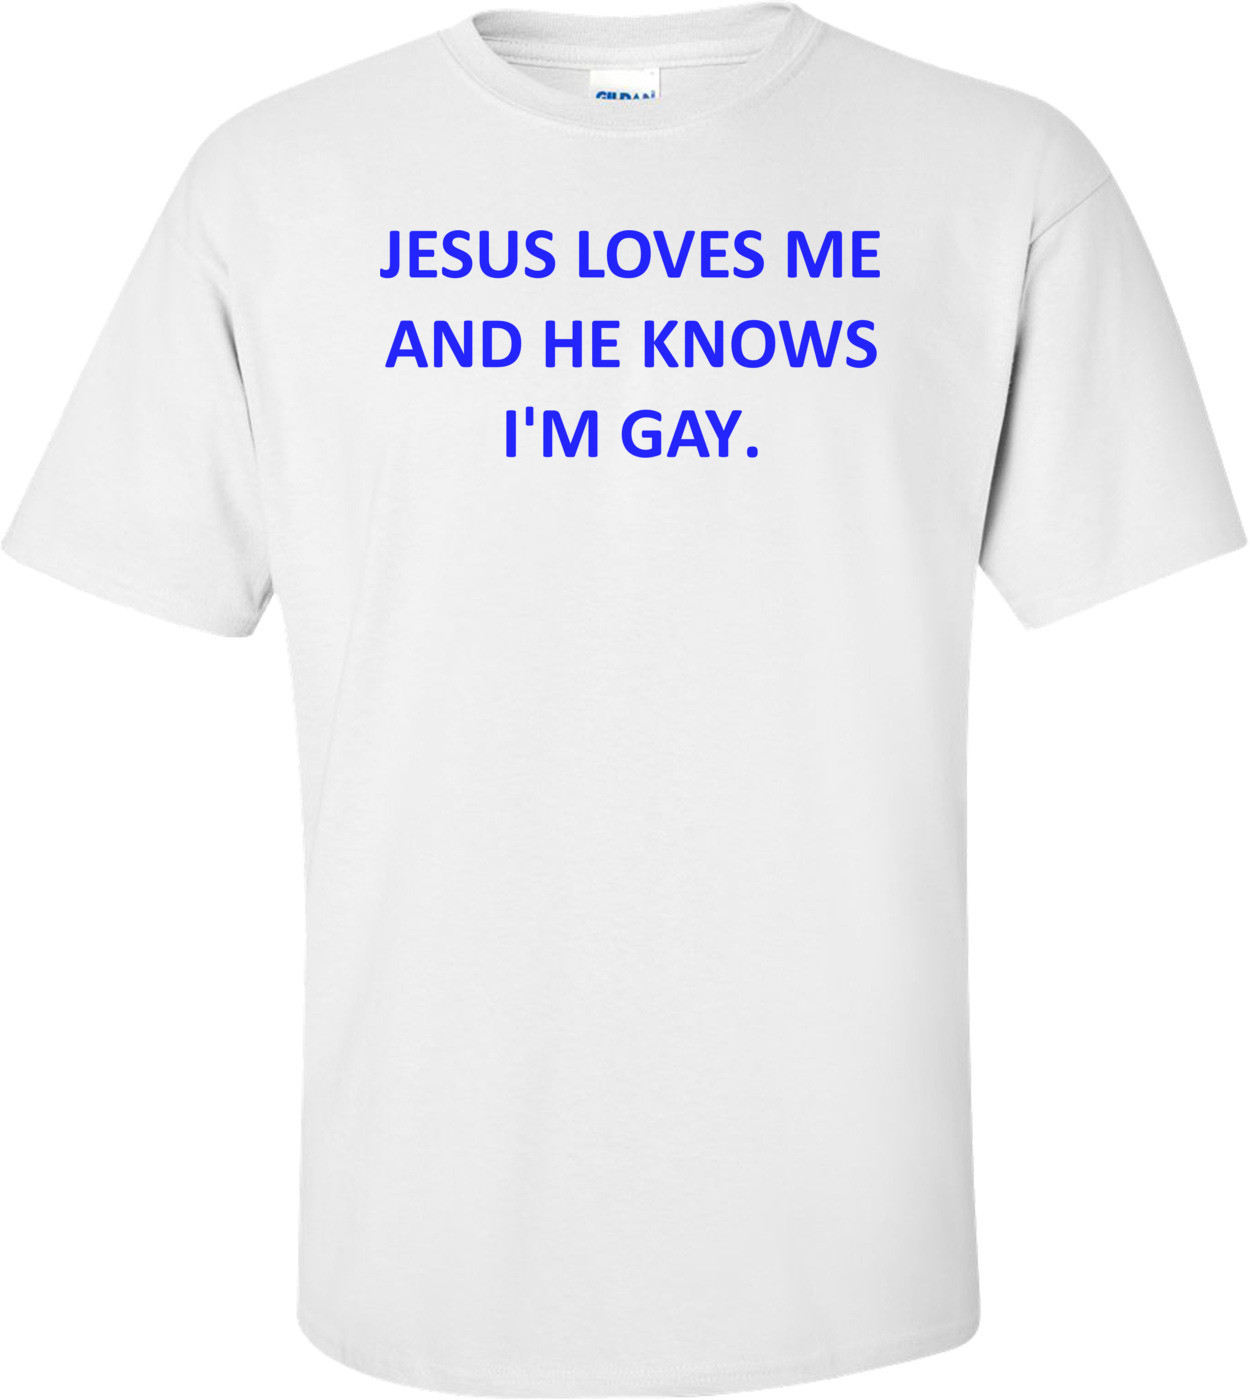 JESUS LOVES ME AND HE KNOWS I'M GAY. Shirt